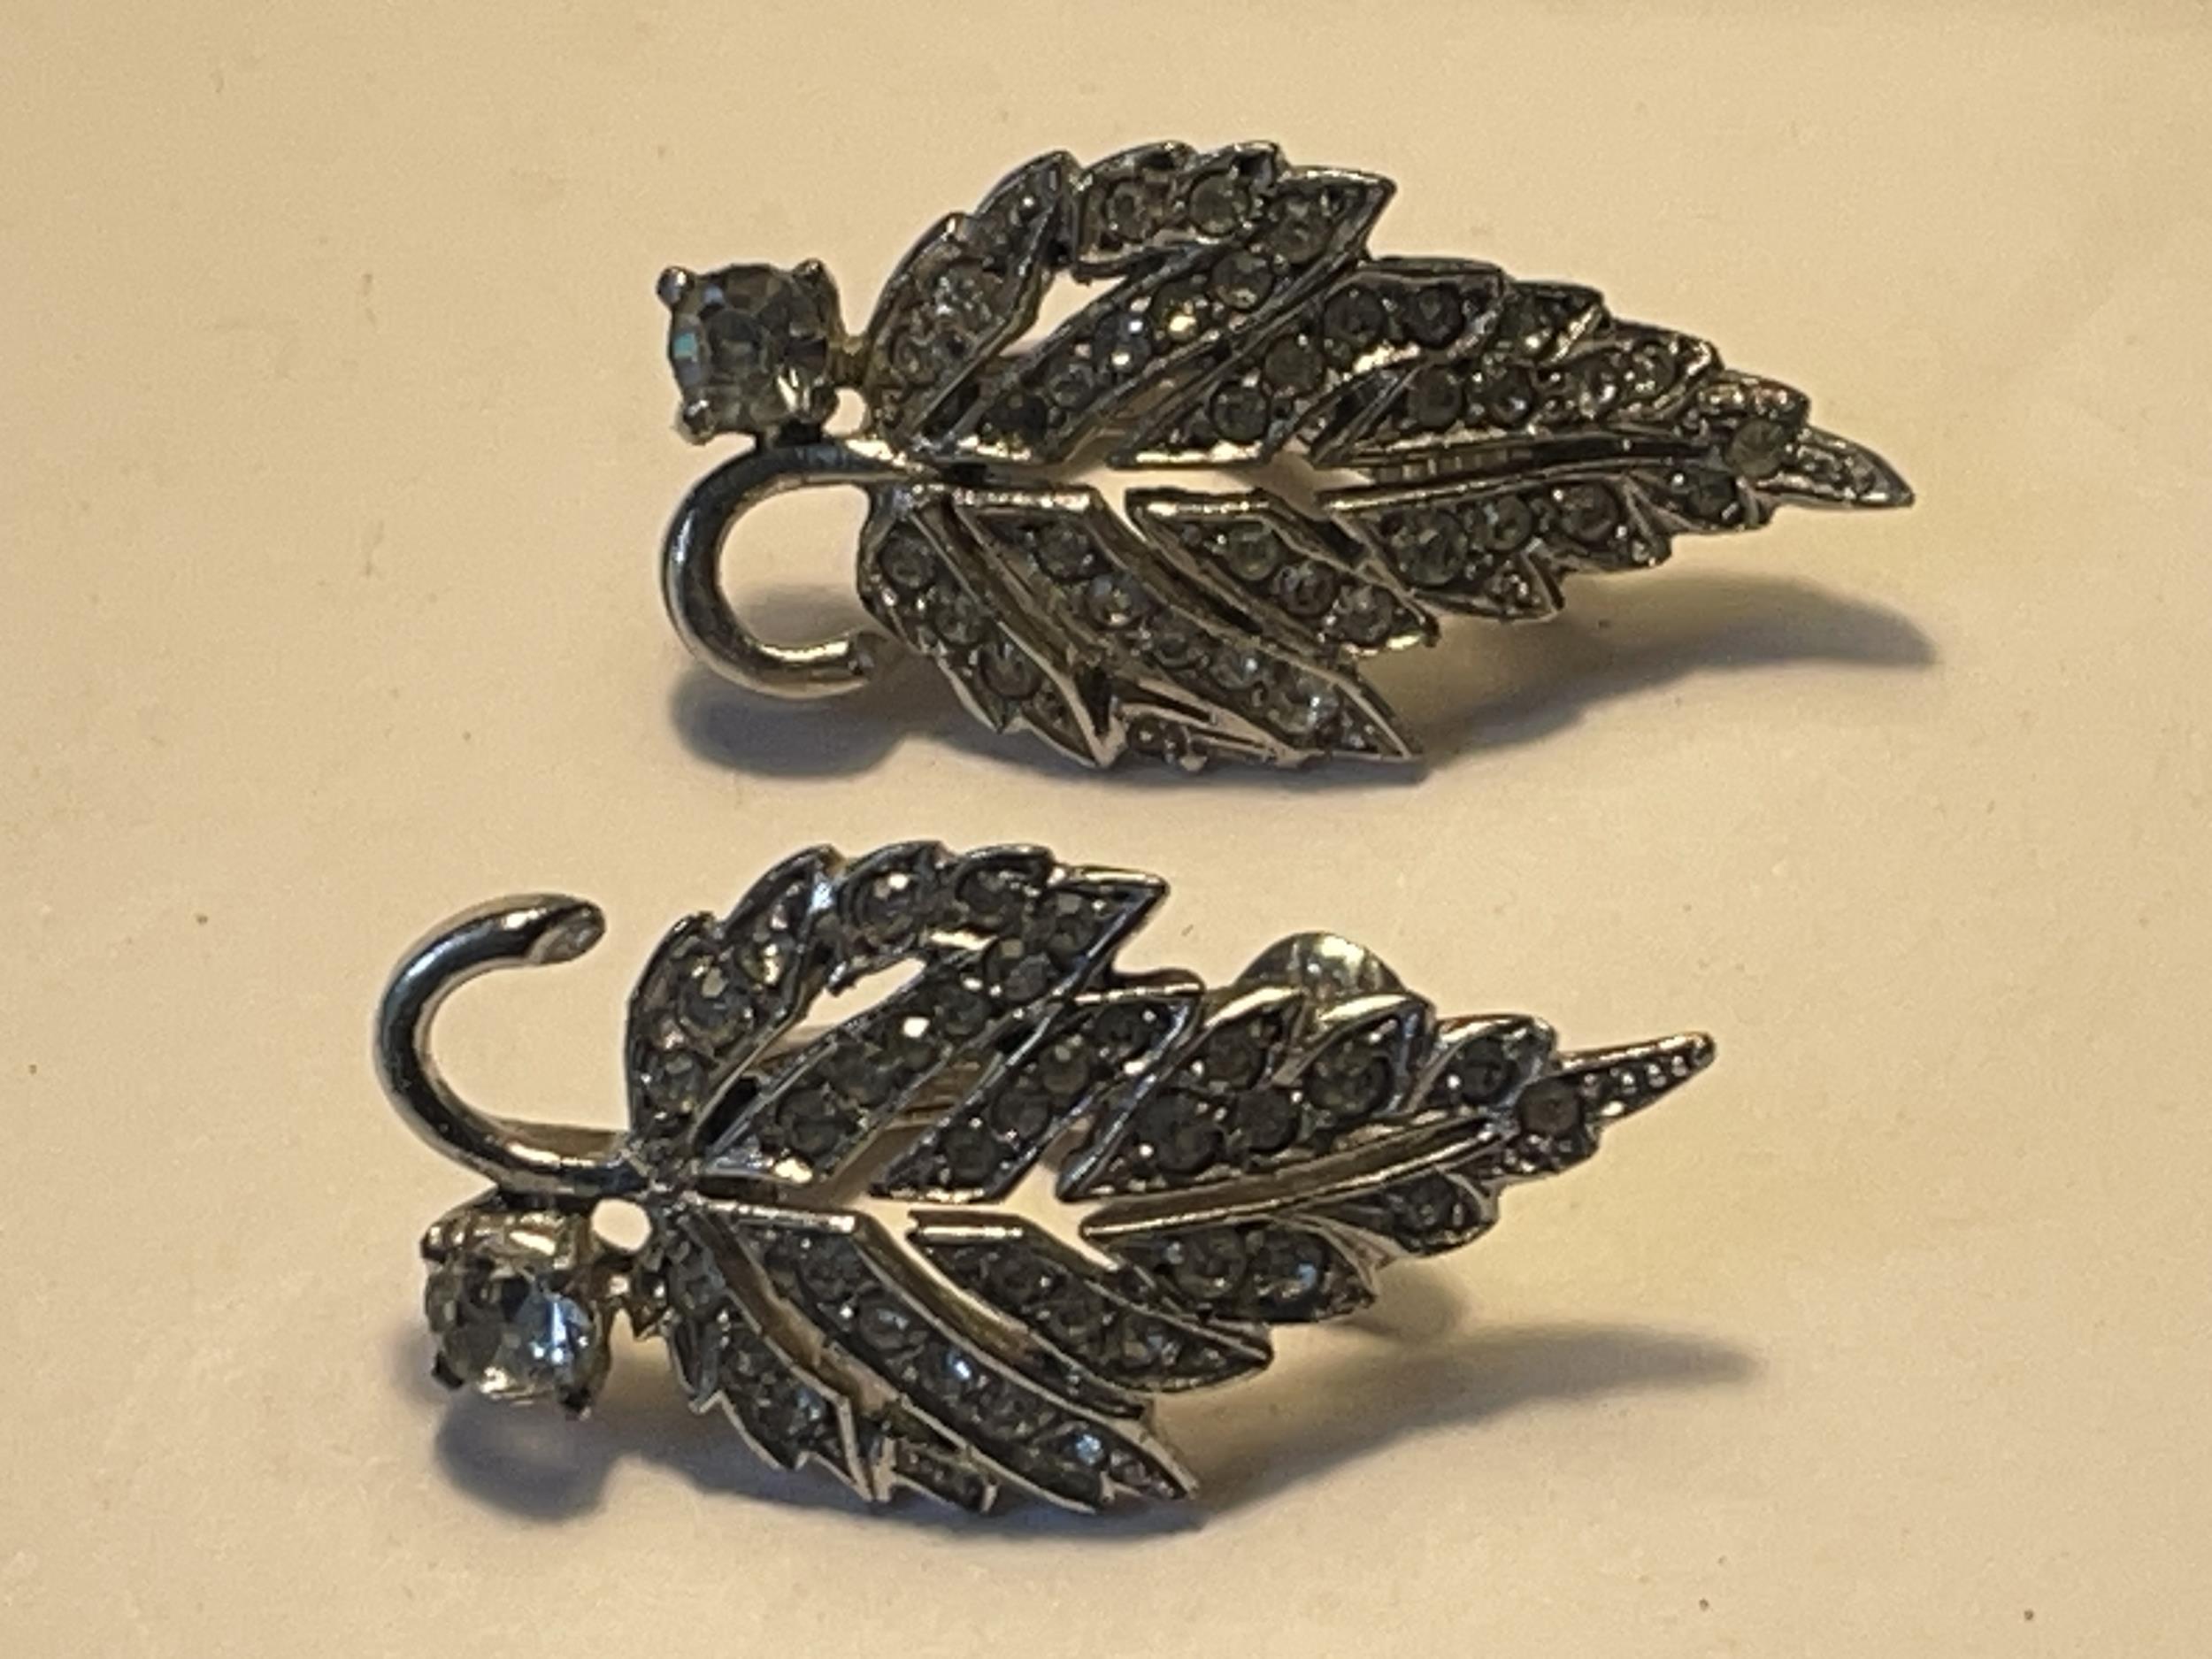 A PAIR OF 1040'S METAL RHODIUM AND CLEAR STONE EARRINGS IN A LEAF DESIGN WITH PRESENTATION BOX - Image 3 of 4